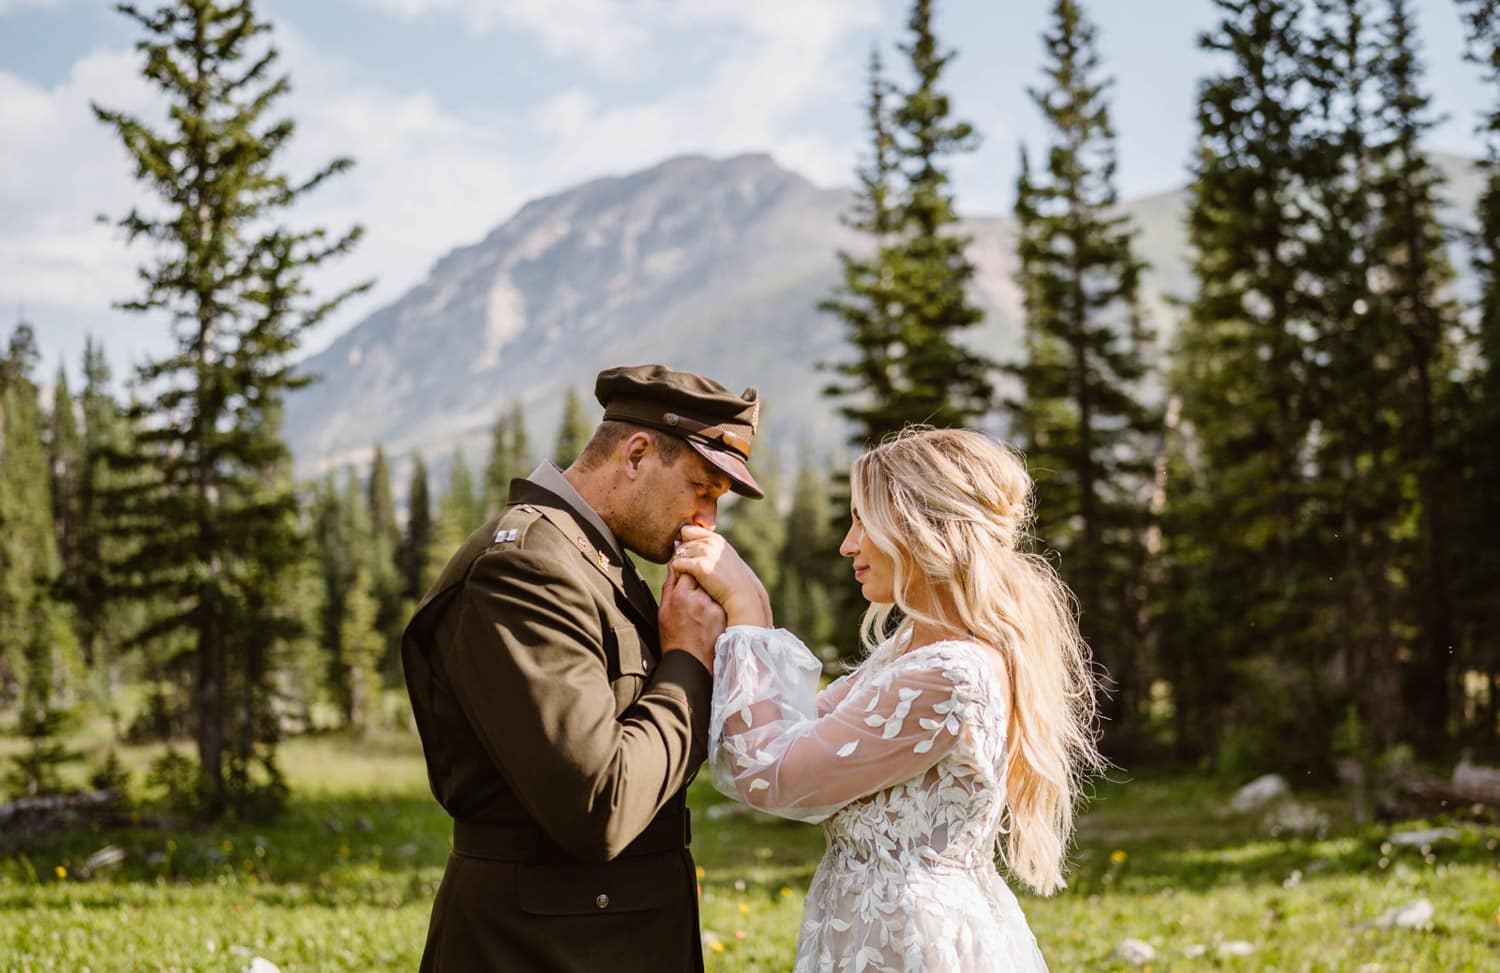 Army Groom and Bride Sunrise Hiking Elopement Boulder Colorado